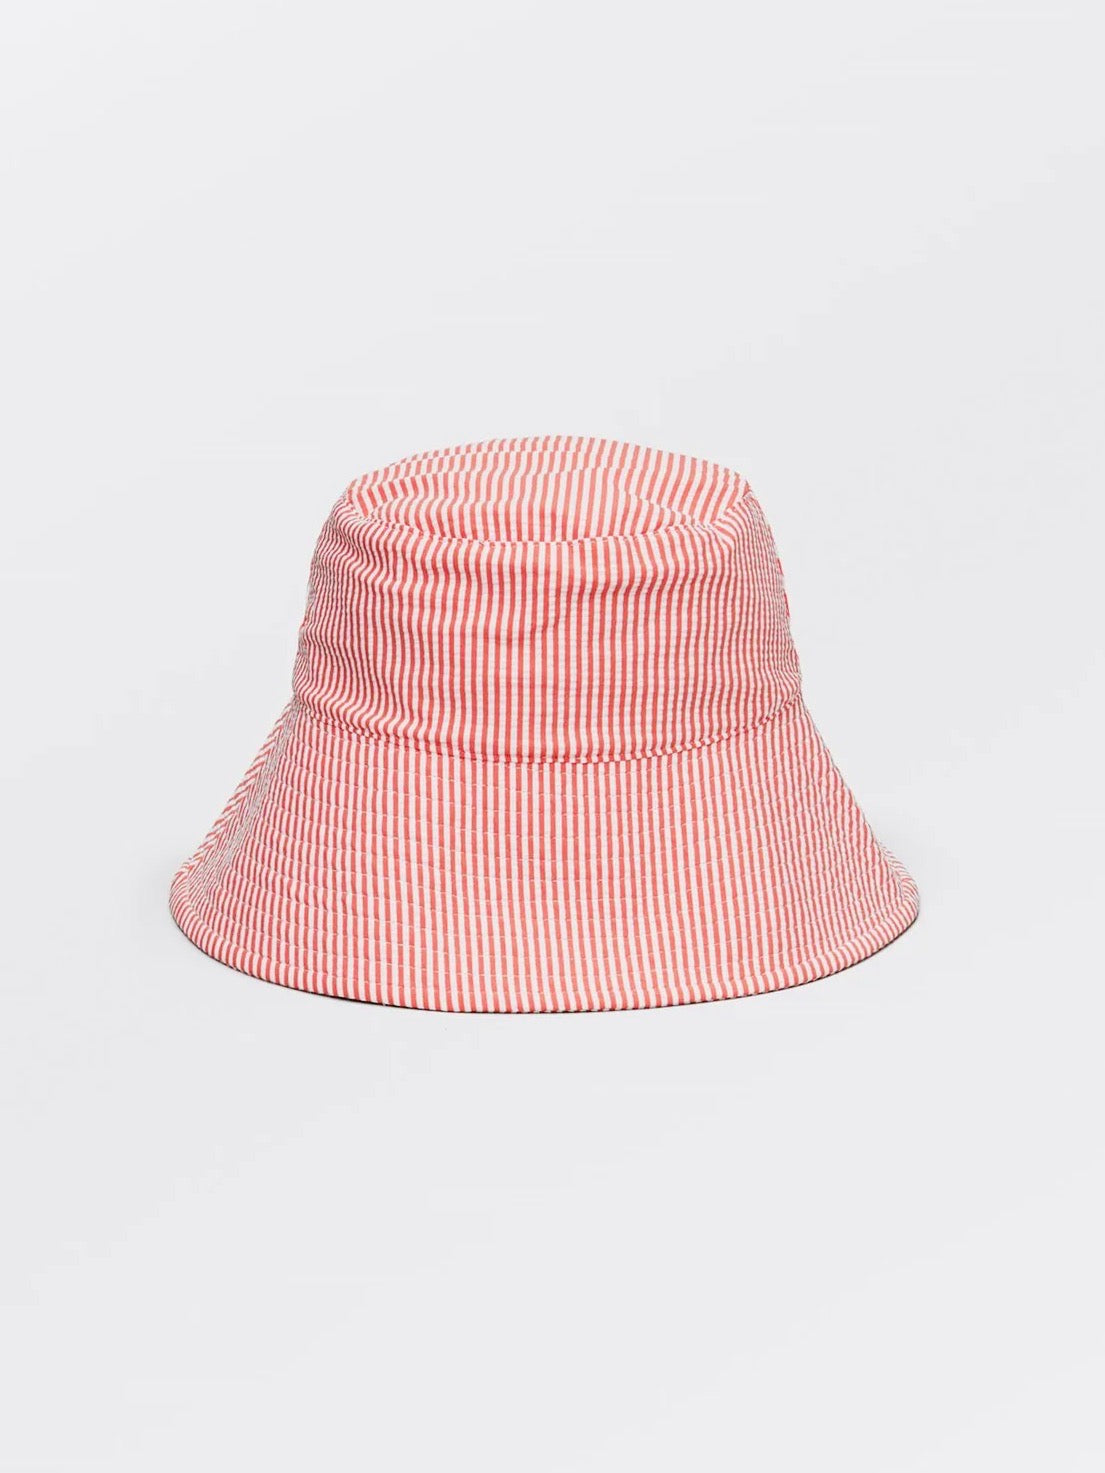 Striba Bucket Hat, SPICED CORAL